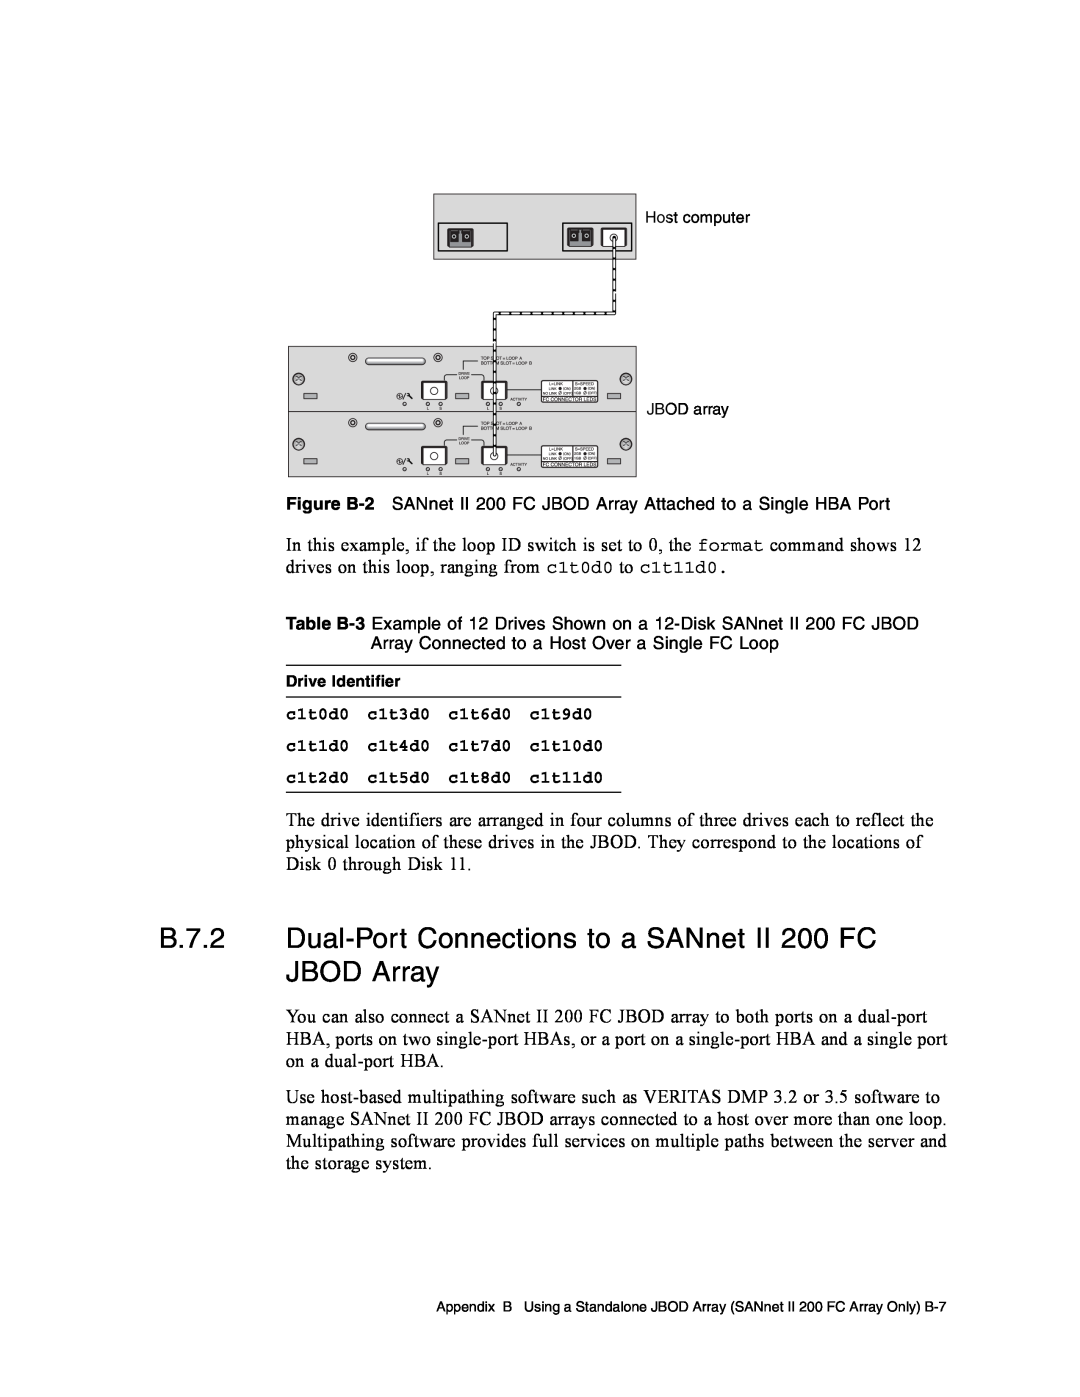 Dot Hill Systems service manual B.7.2 Dual-Port Connections to a SANnet II 200 FC JBOD Array, Figure B-2 